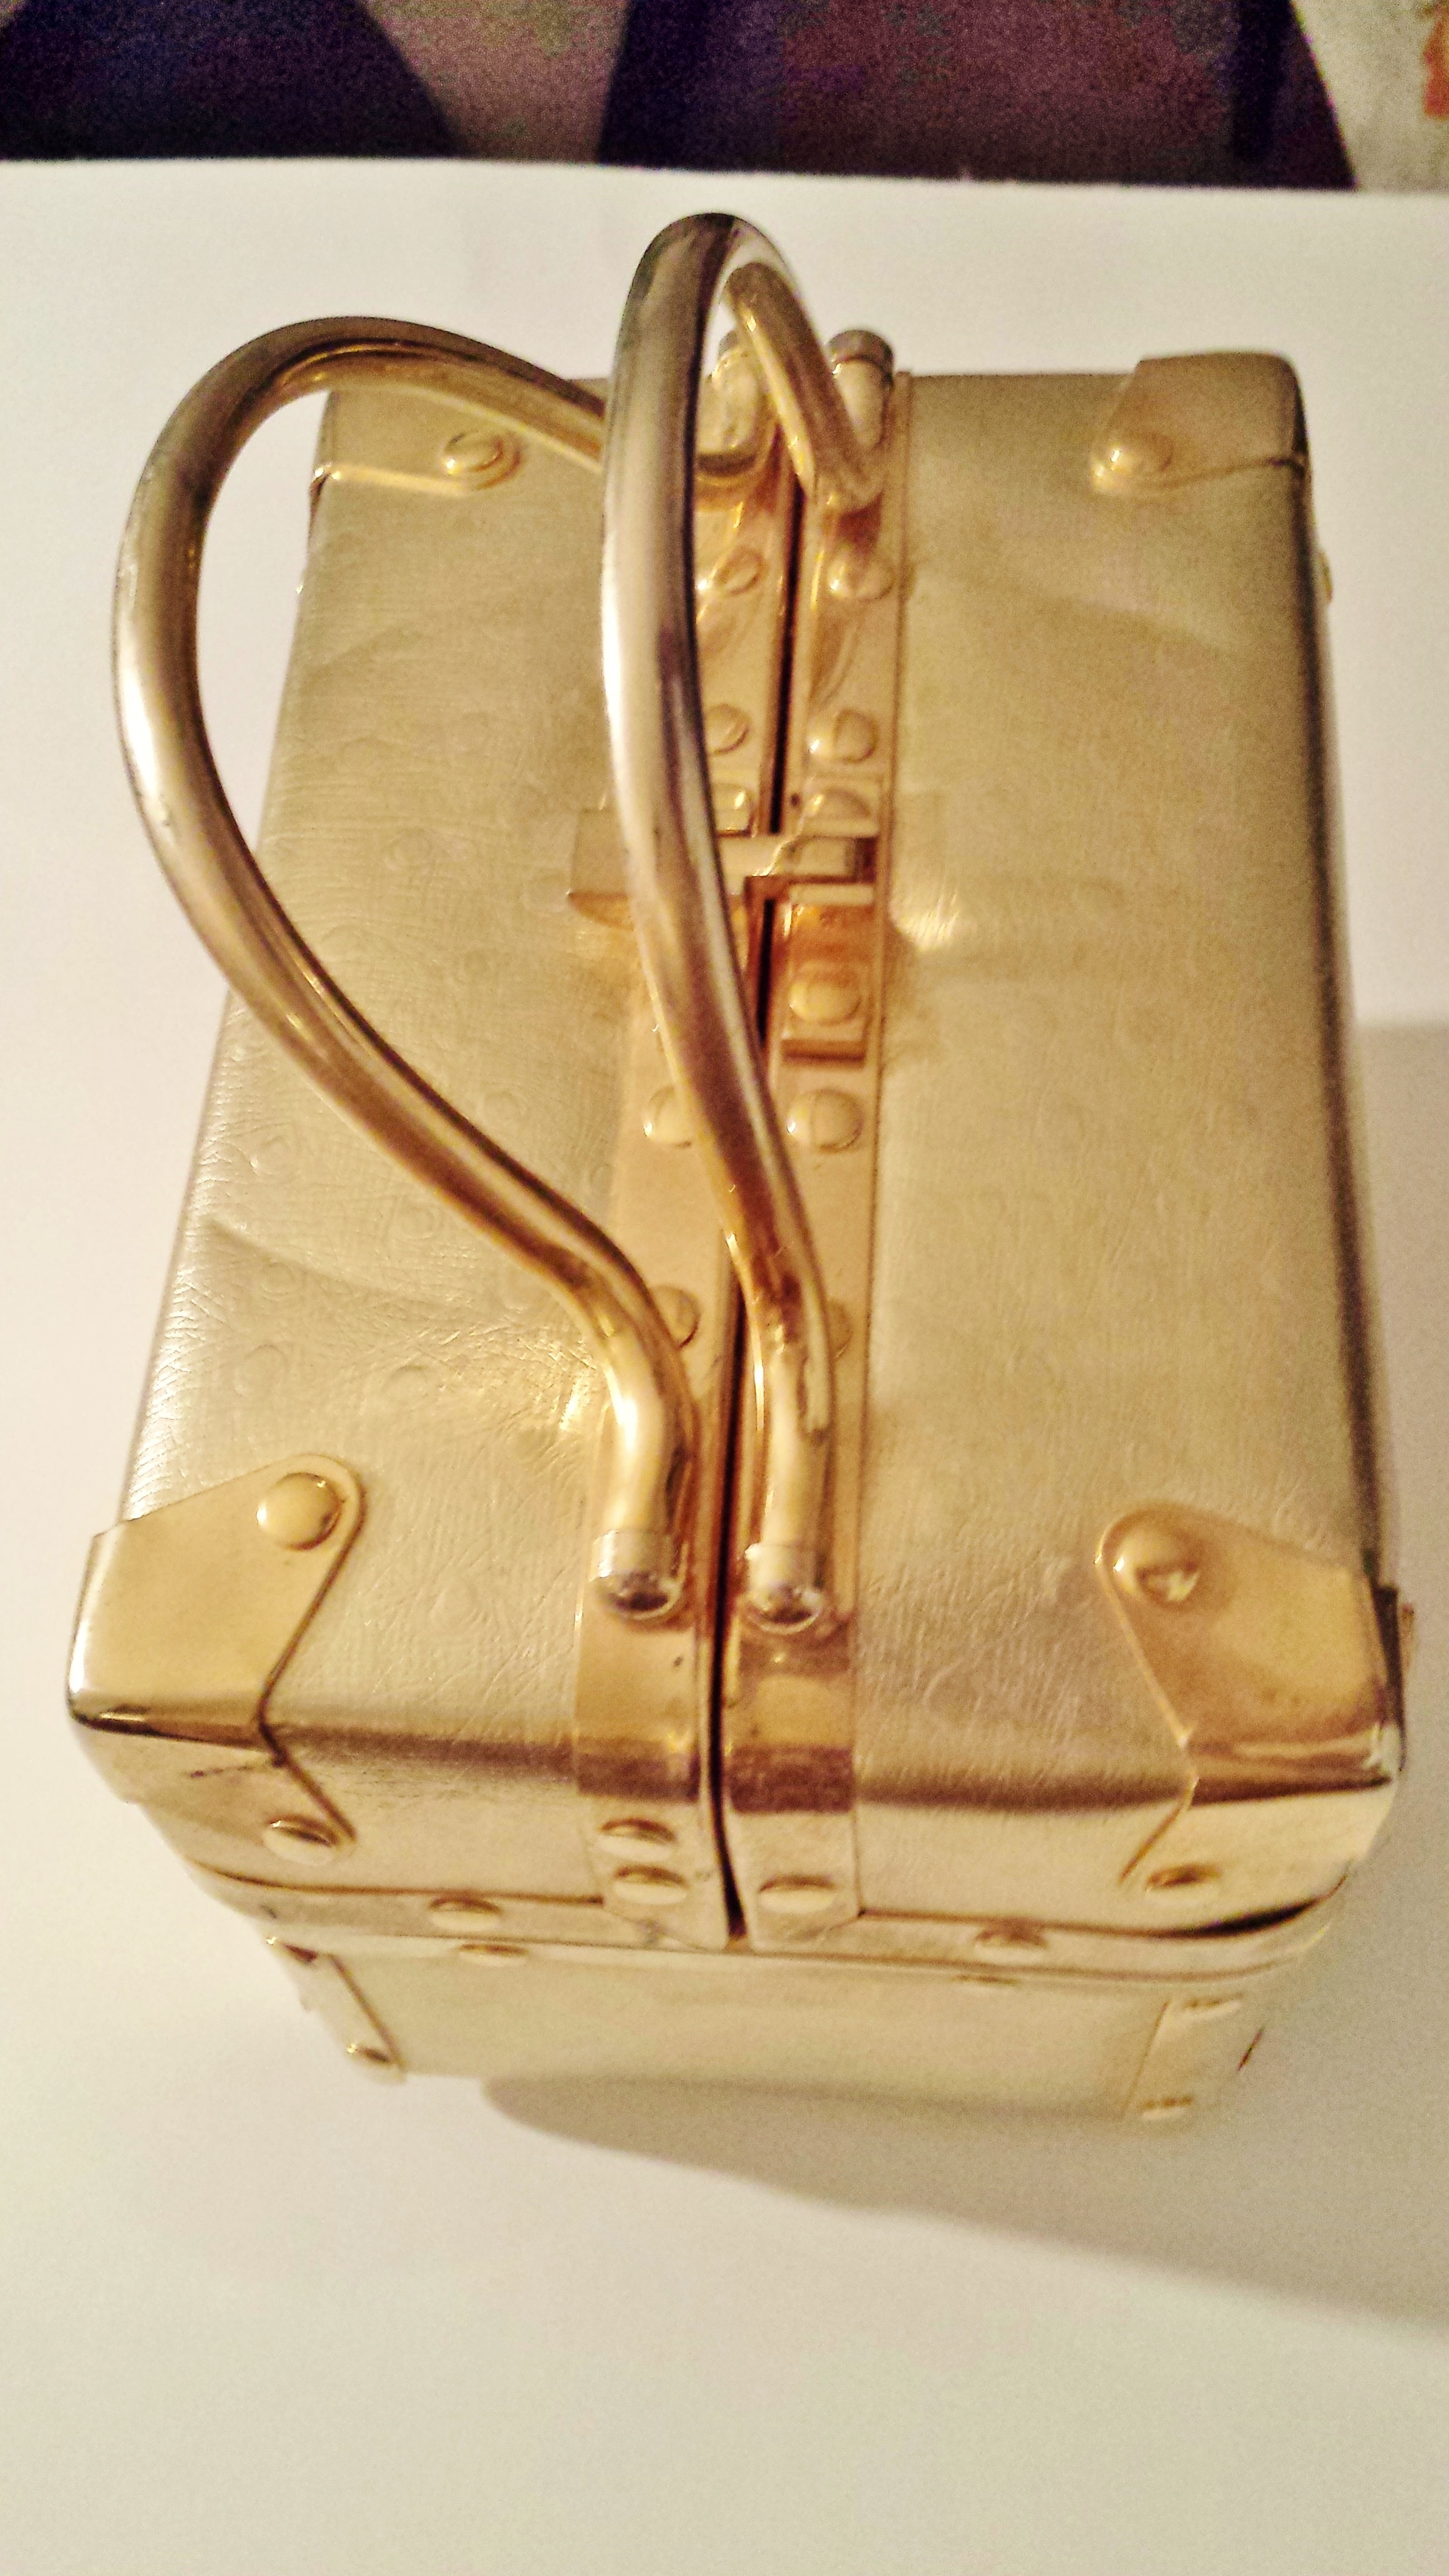 Gold Leather Hand Bag, Box Style, Travel Trunk Purse, Chic Stylish Vintage  Bag